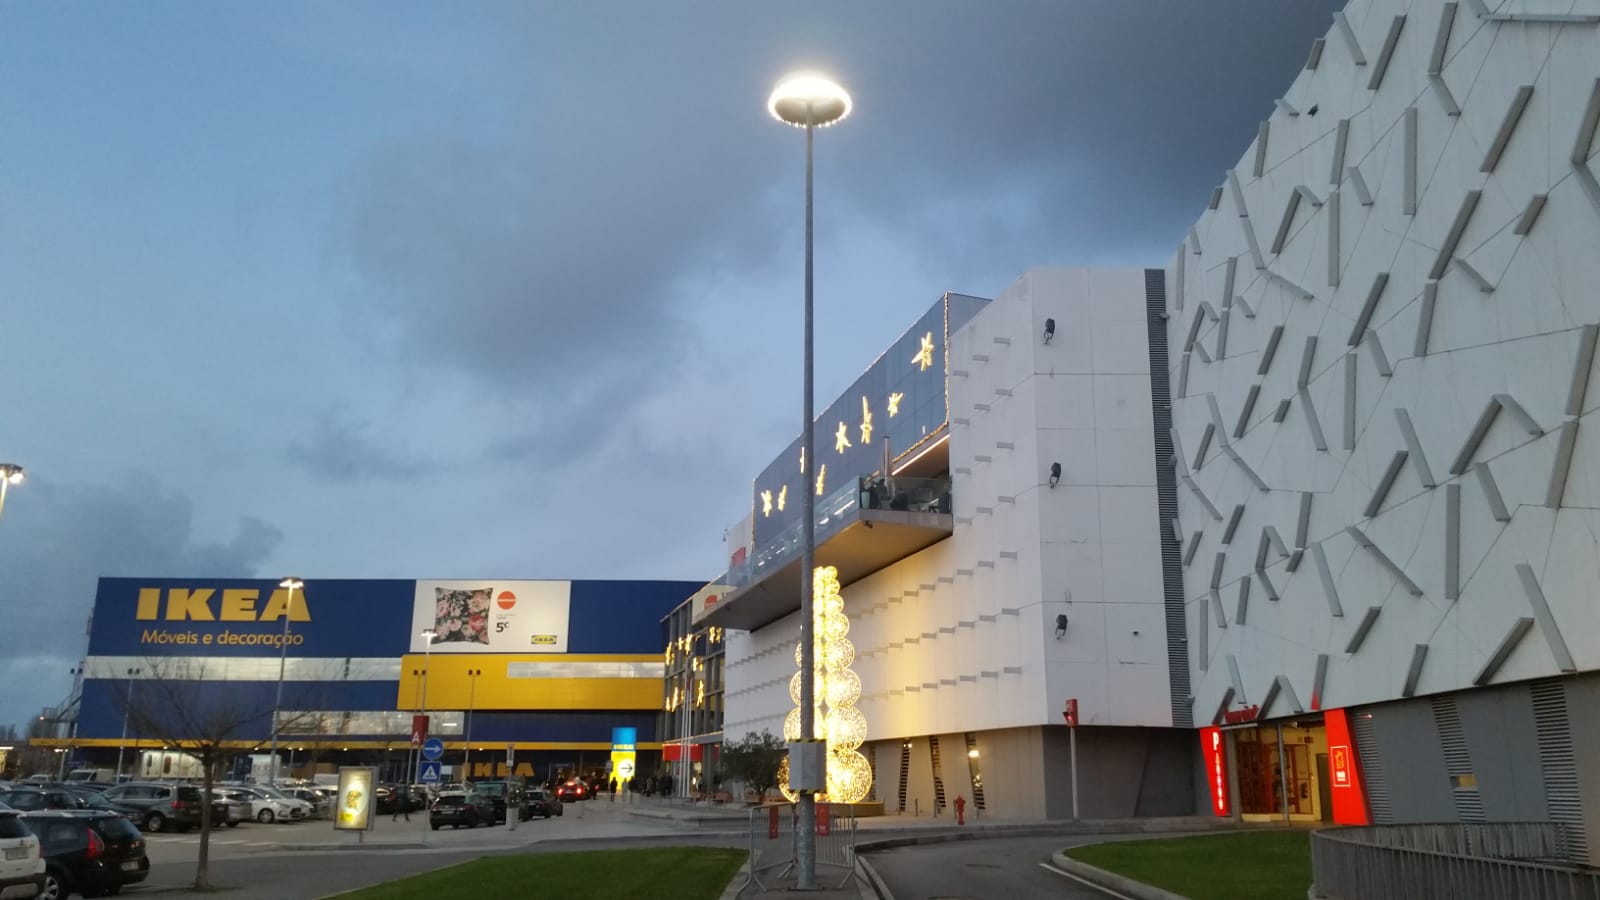 Shopping mall in Matosinhos reduces energy consumption by 94% with smart lighting